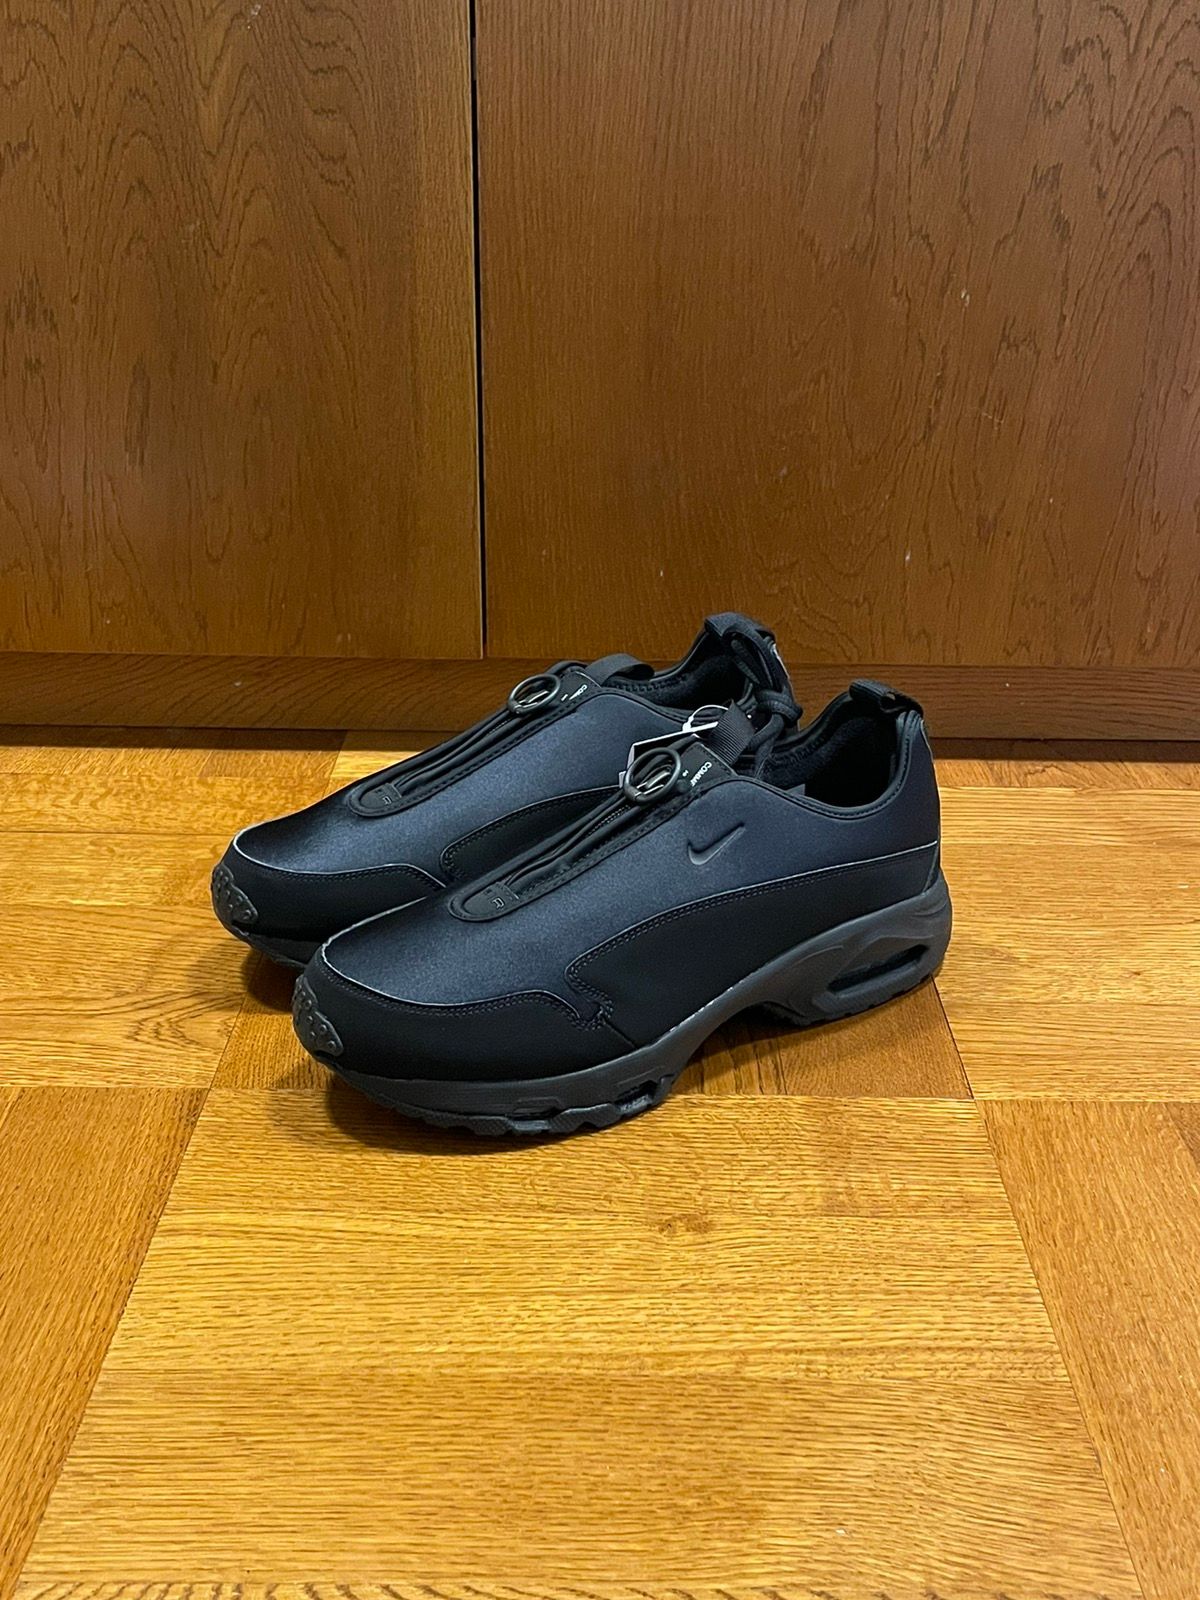 Black CDG air max SNDR SP size 10 in VNDS condition with OG box